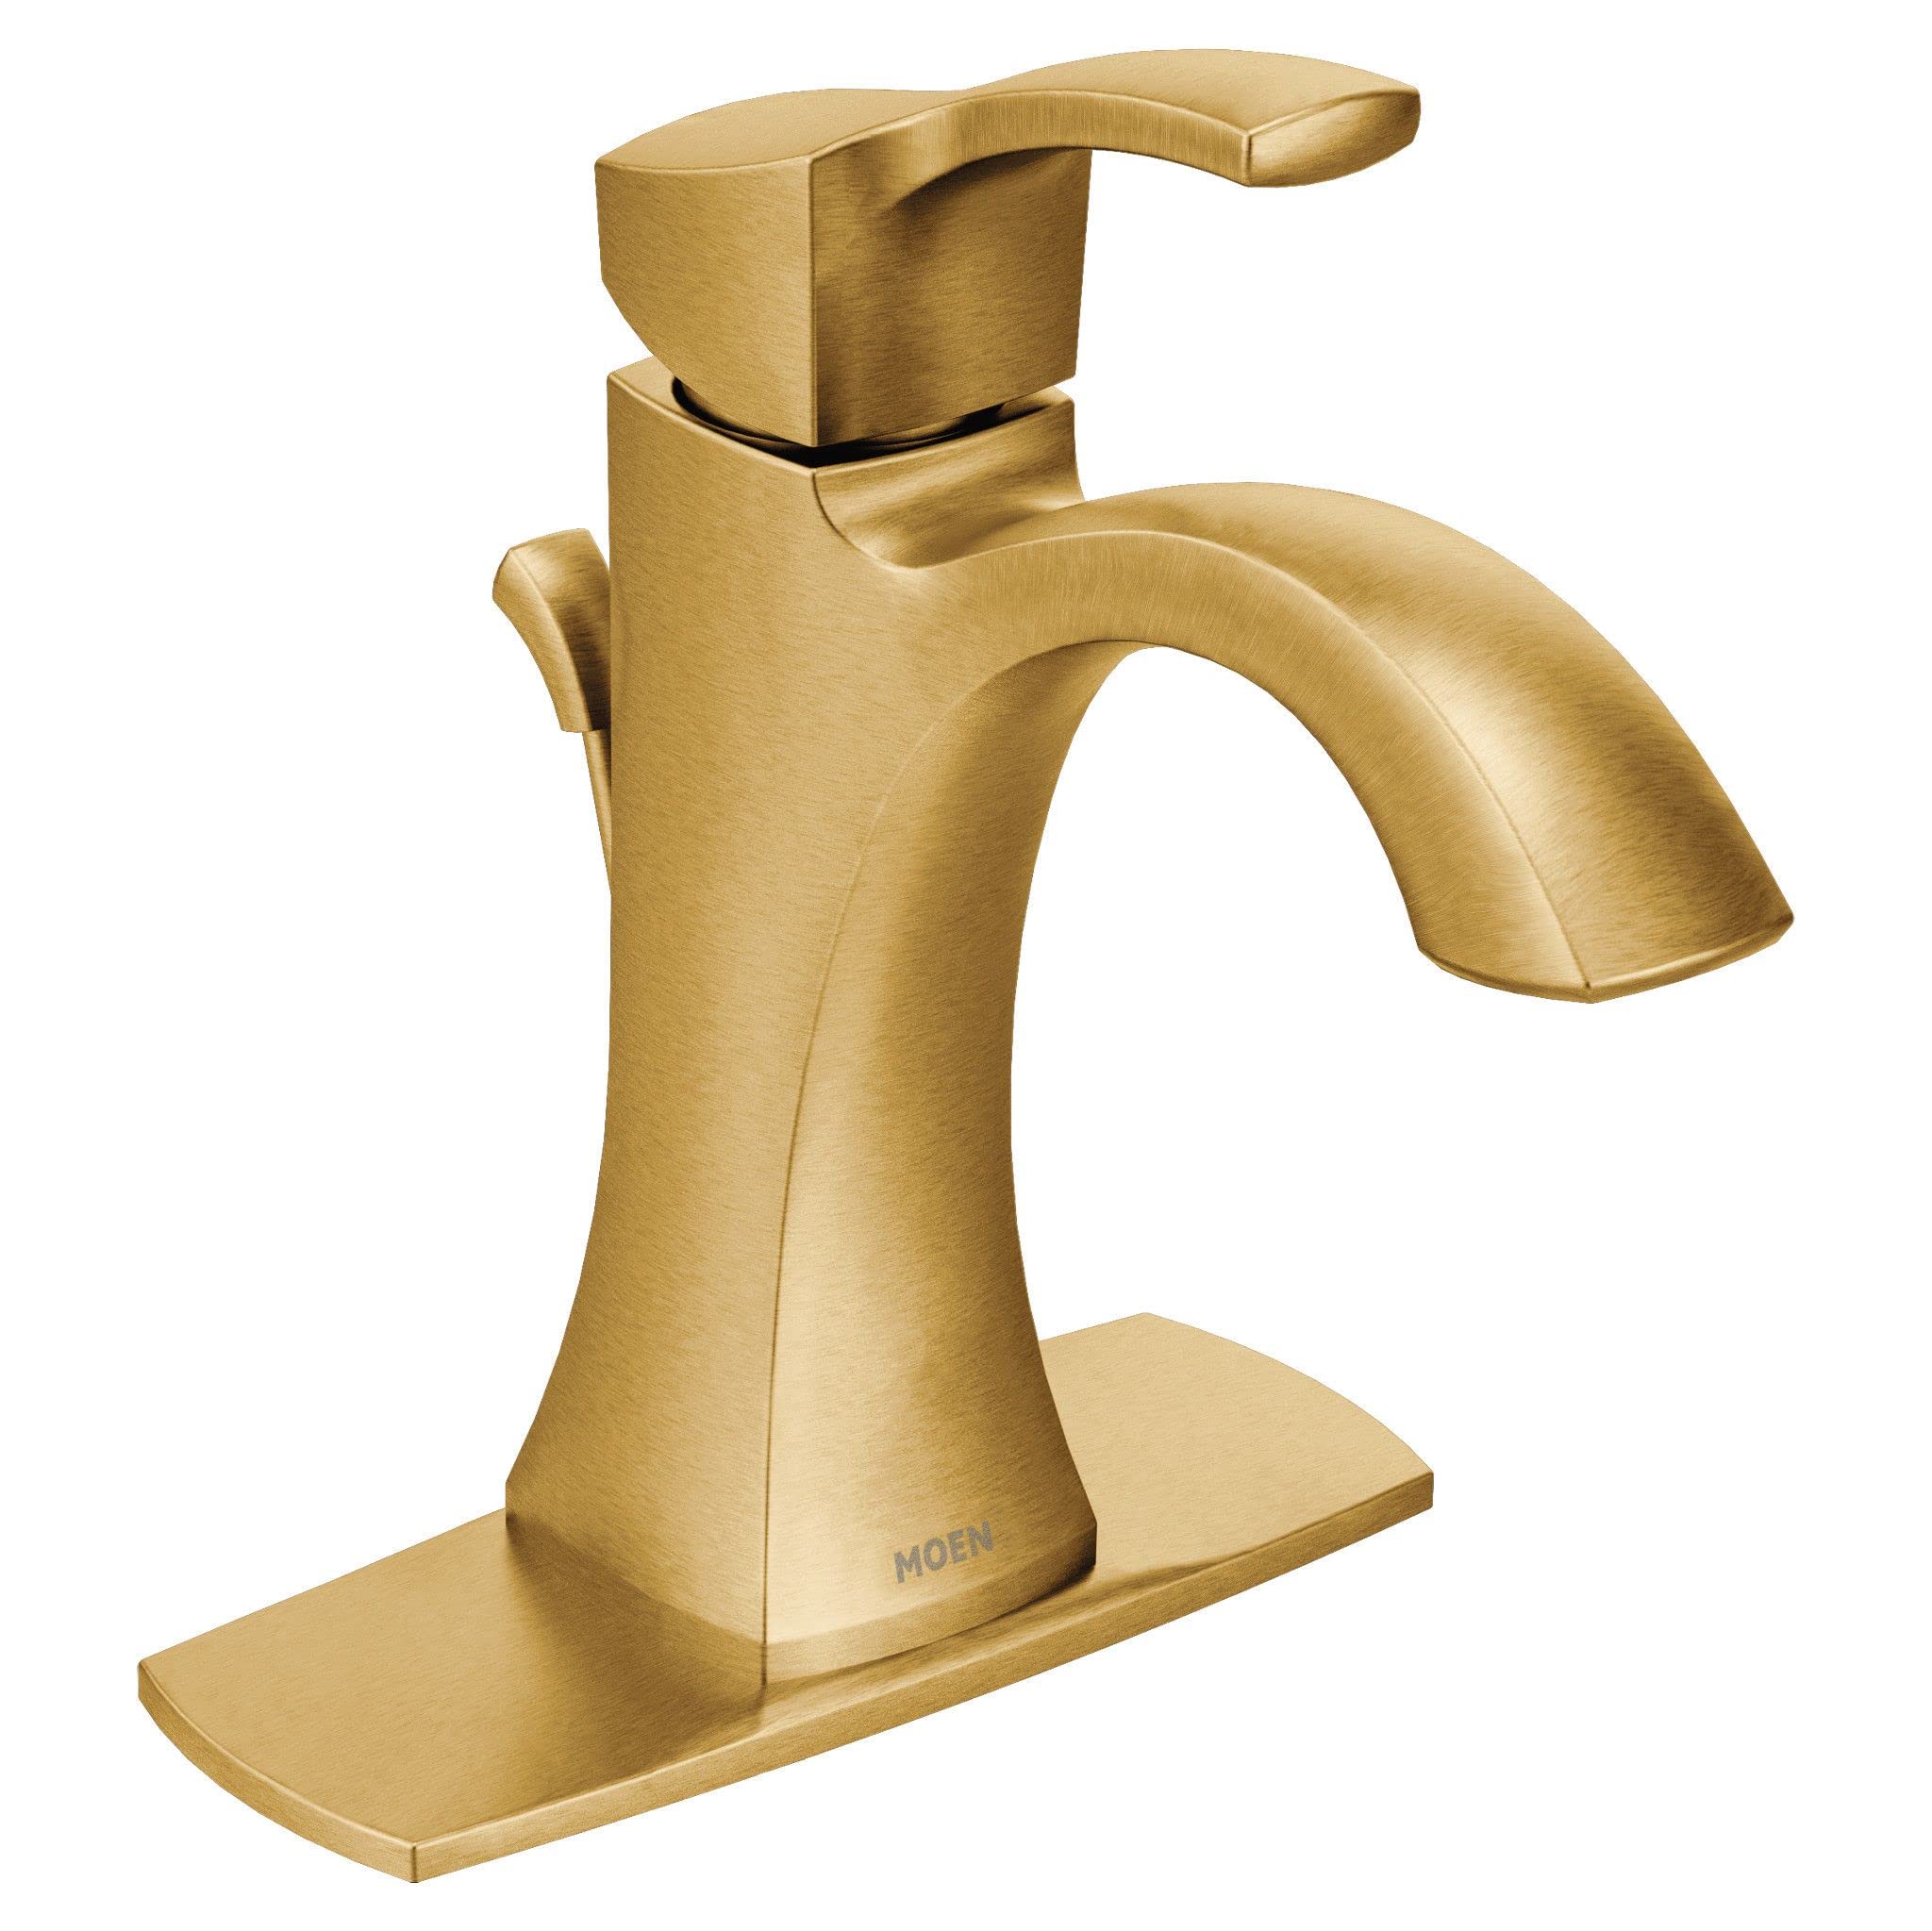 Moen Voss Brushed Gold One-Handle High Arc Bathroom Faucet with Drain Assembly, 6903BG